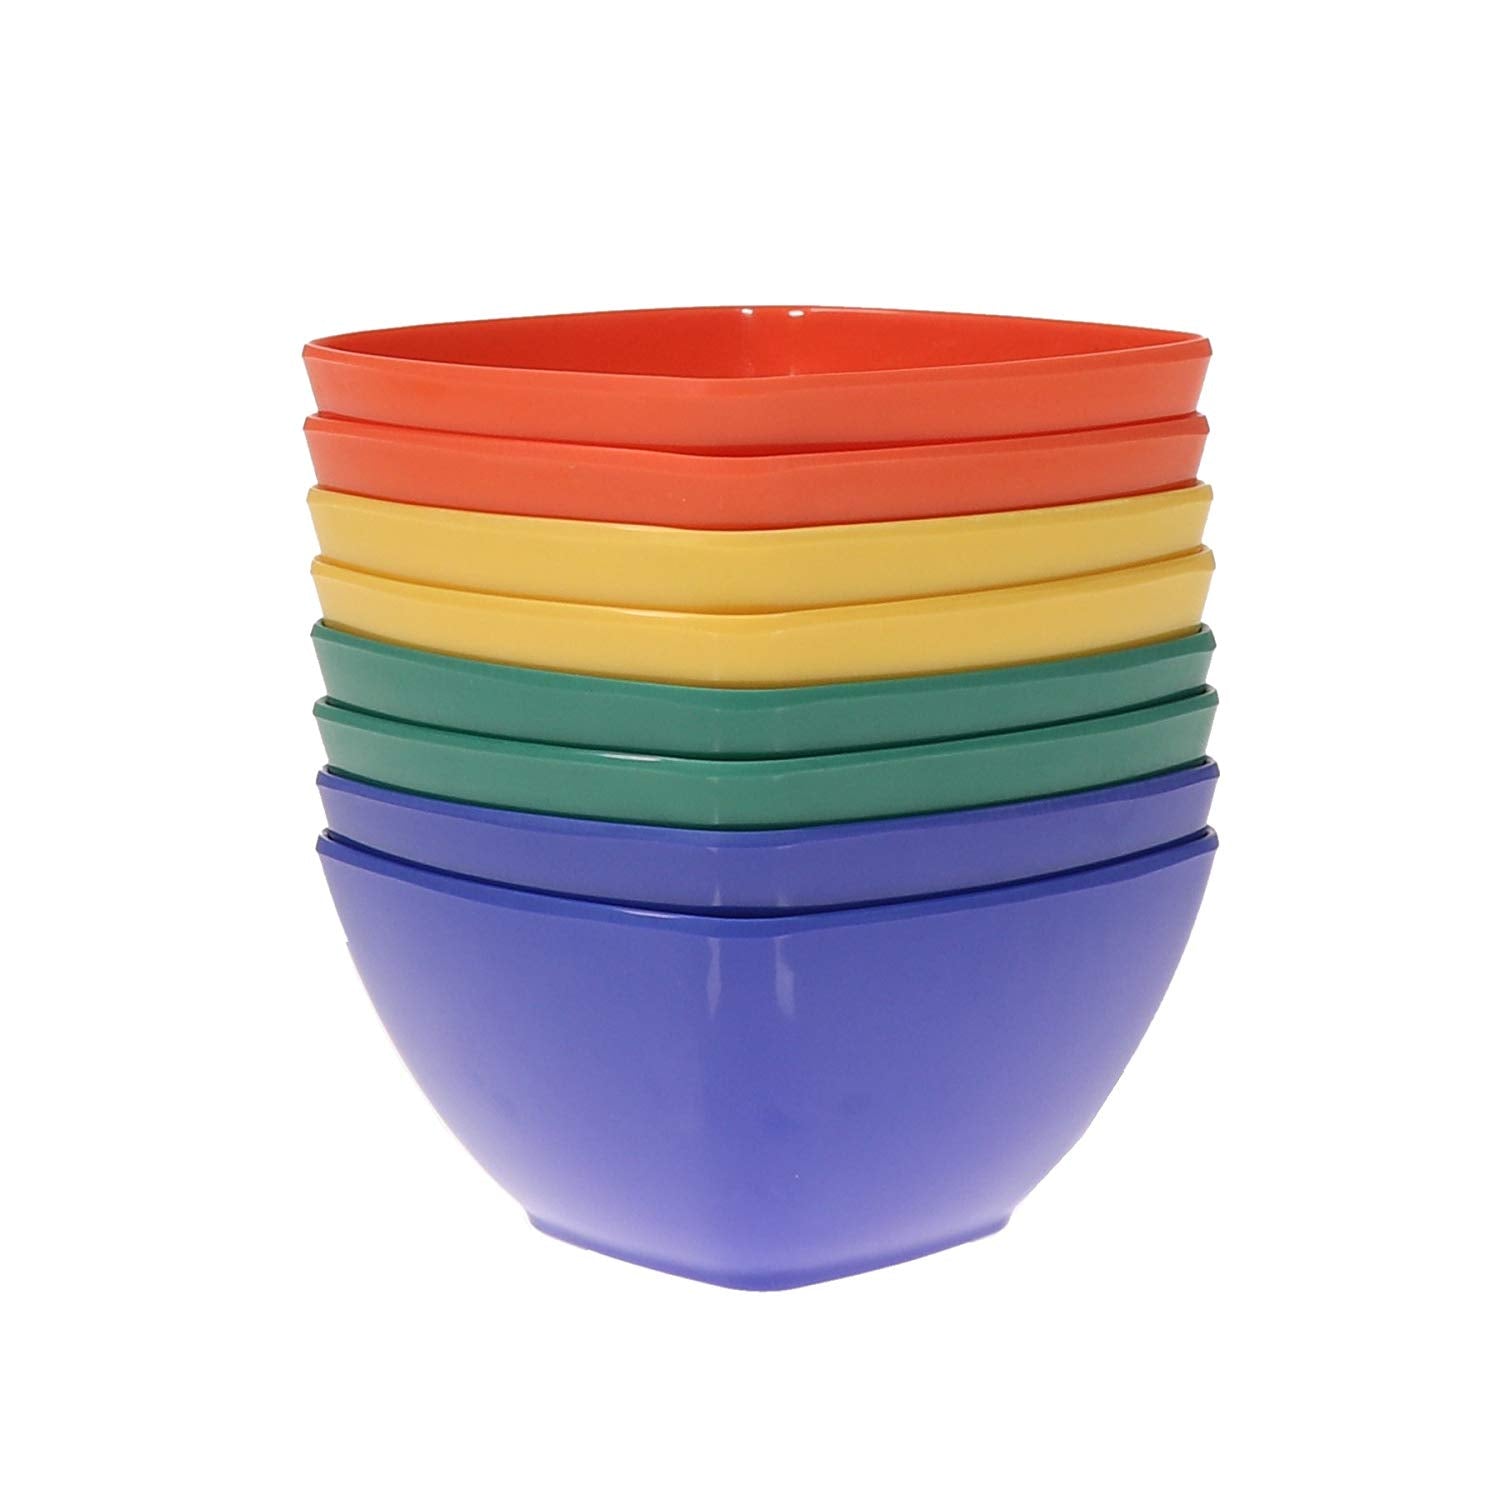 Handi-Ware Bulk Melamine Blend 8-Pack - 5.5" Bowl - Break Resistant - Indoor Out Door - 4 Fun Assorted Colors - Mix And Match By Unity